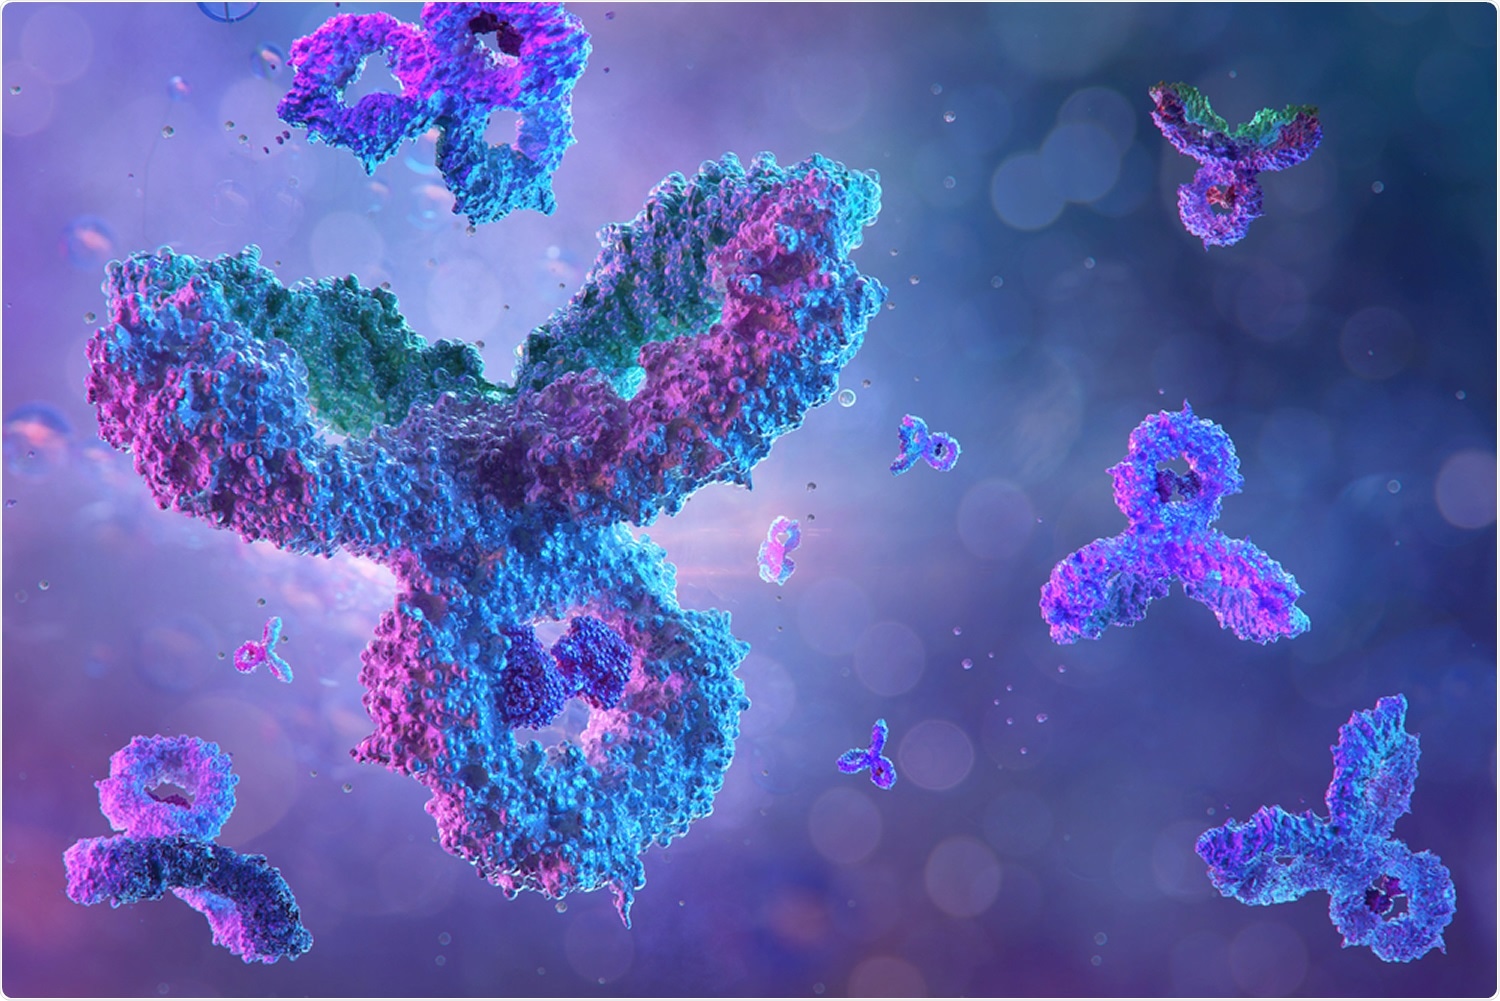 Study: Anti-spike antibody response to natural SARS-CoV-2 infection in the general population. Image Credit: Corona Borealis Studio / Shutterstock